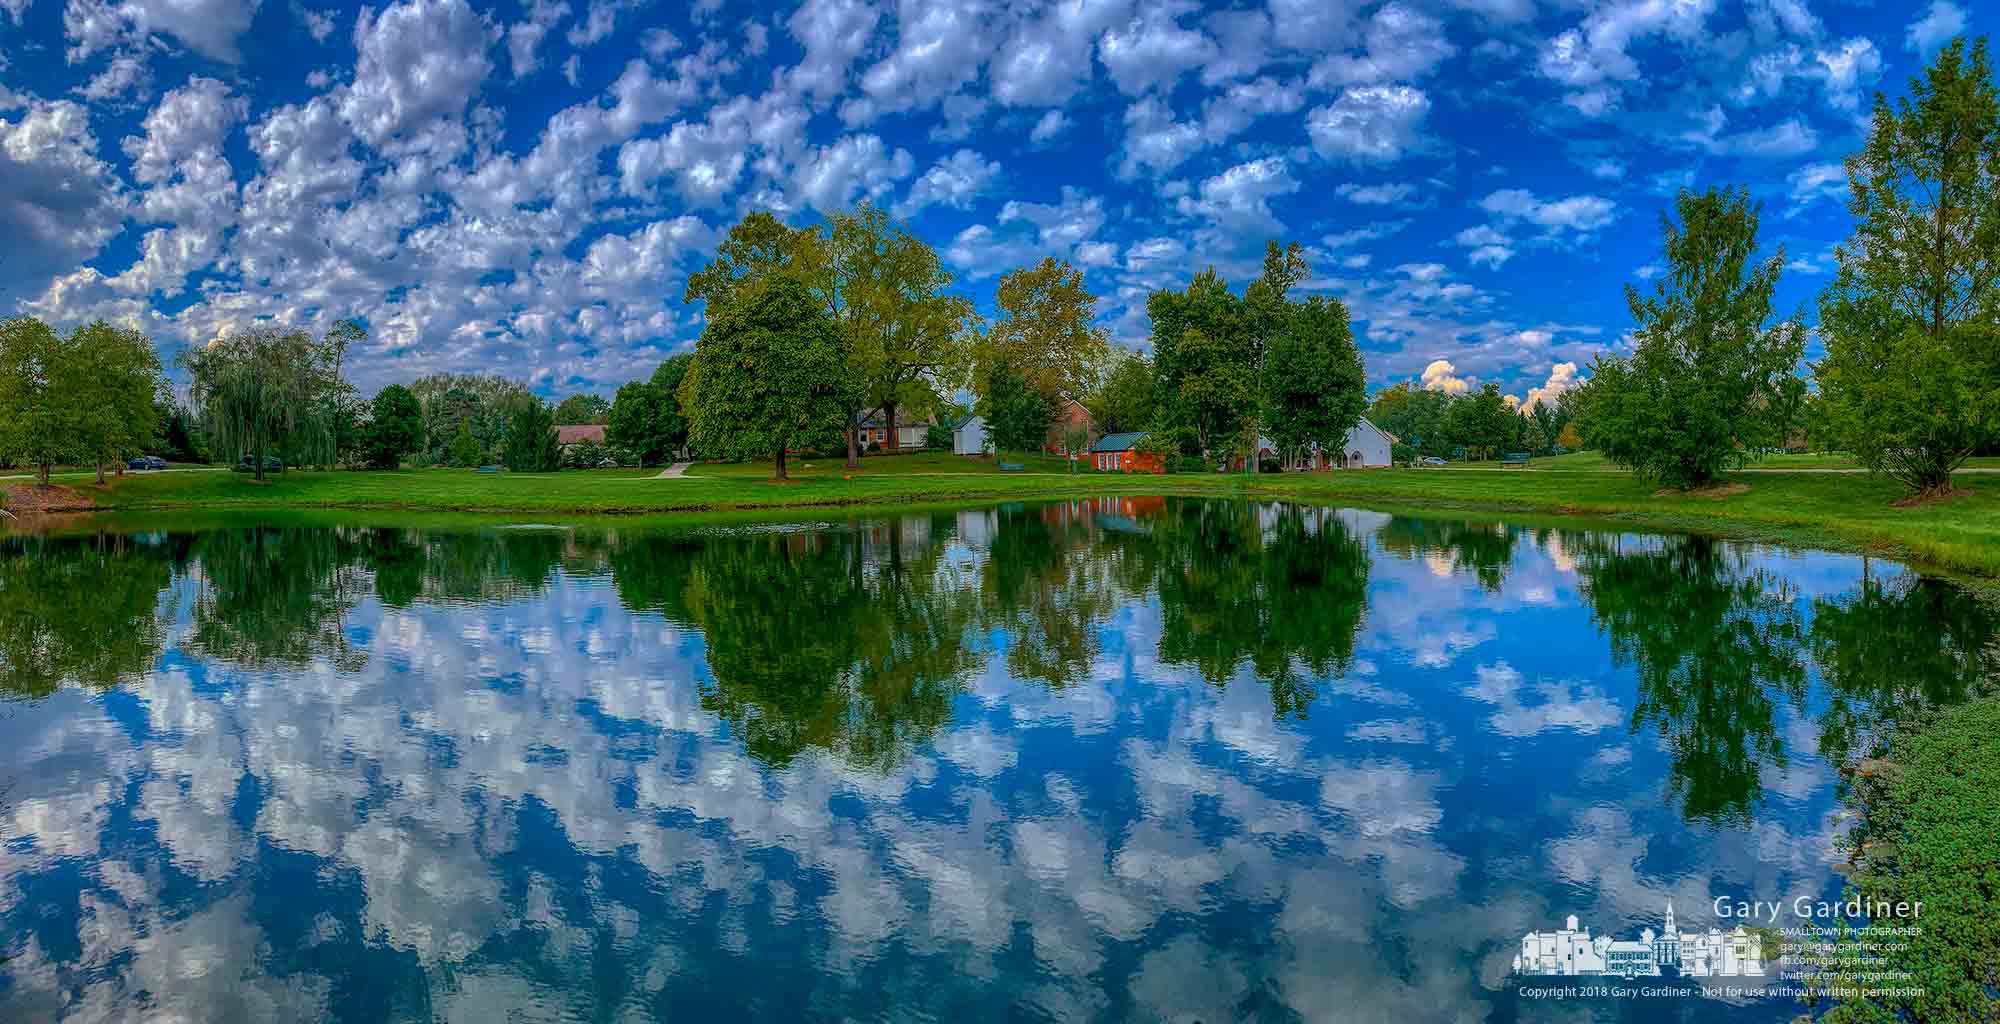 Noon-hour clouds slide across the sky over the pond at Heritage Park in Westerville a few hours before a wedding on the grounds. My Final Photo for Oct. 6, 2018.